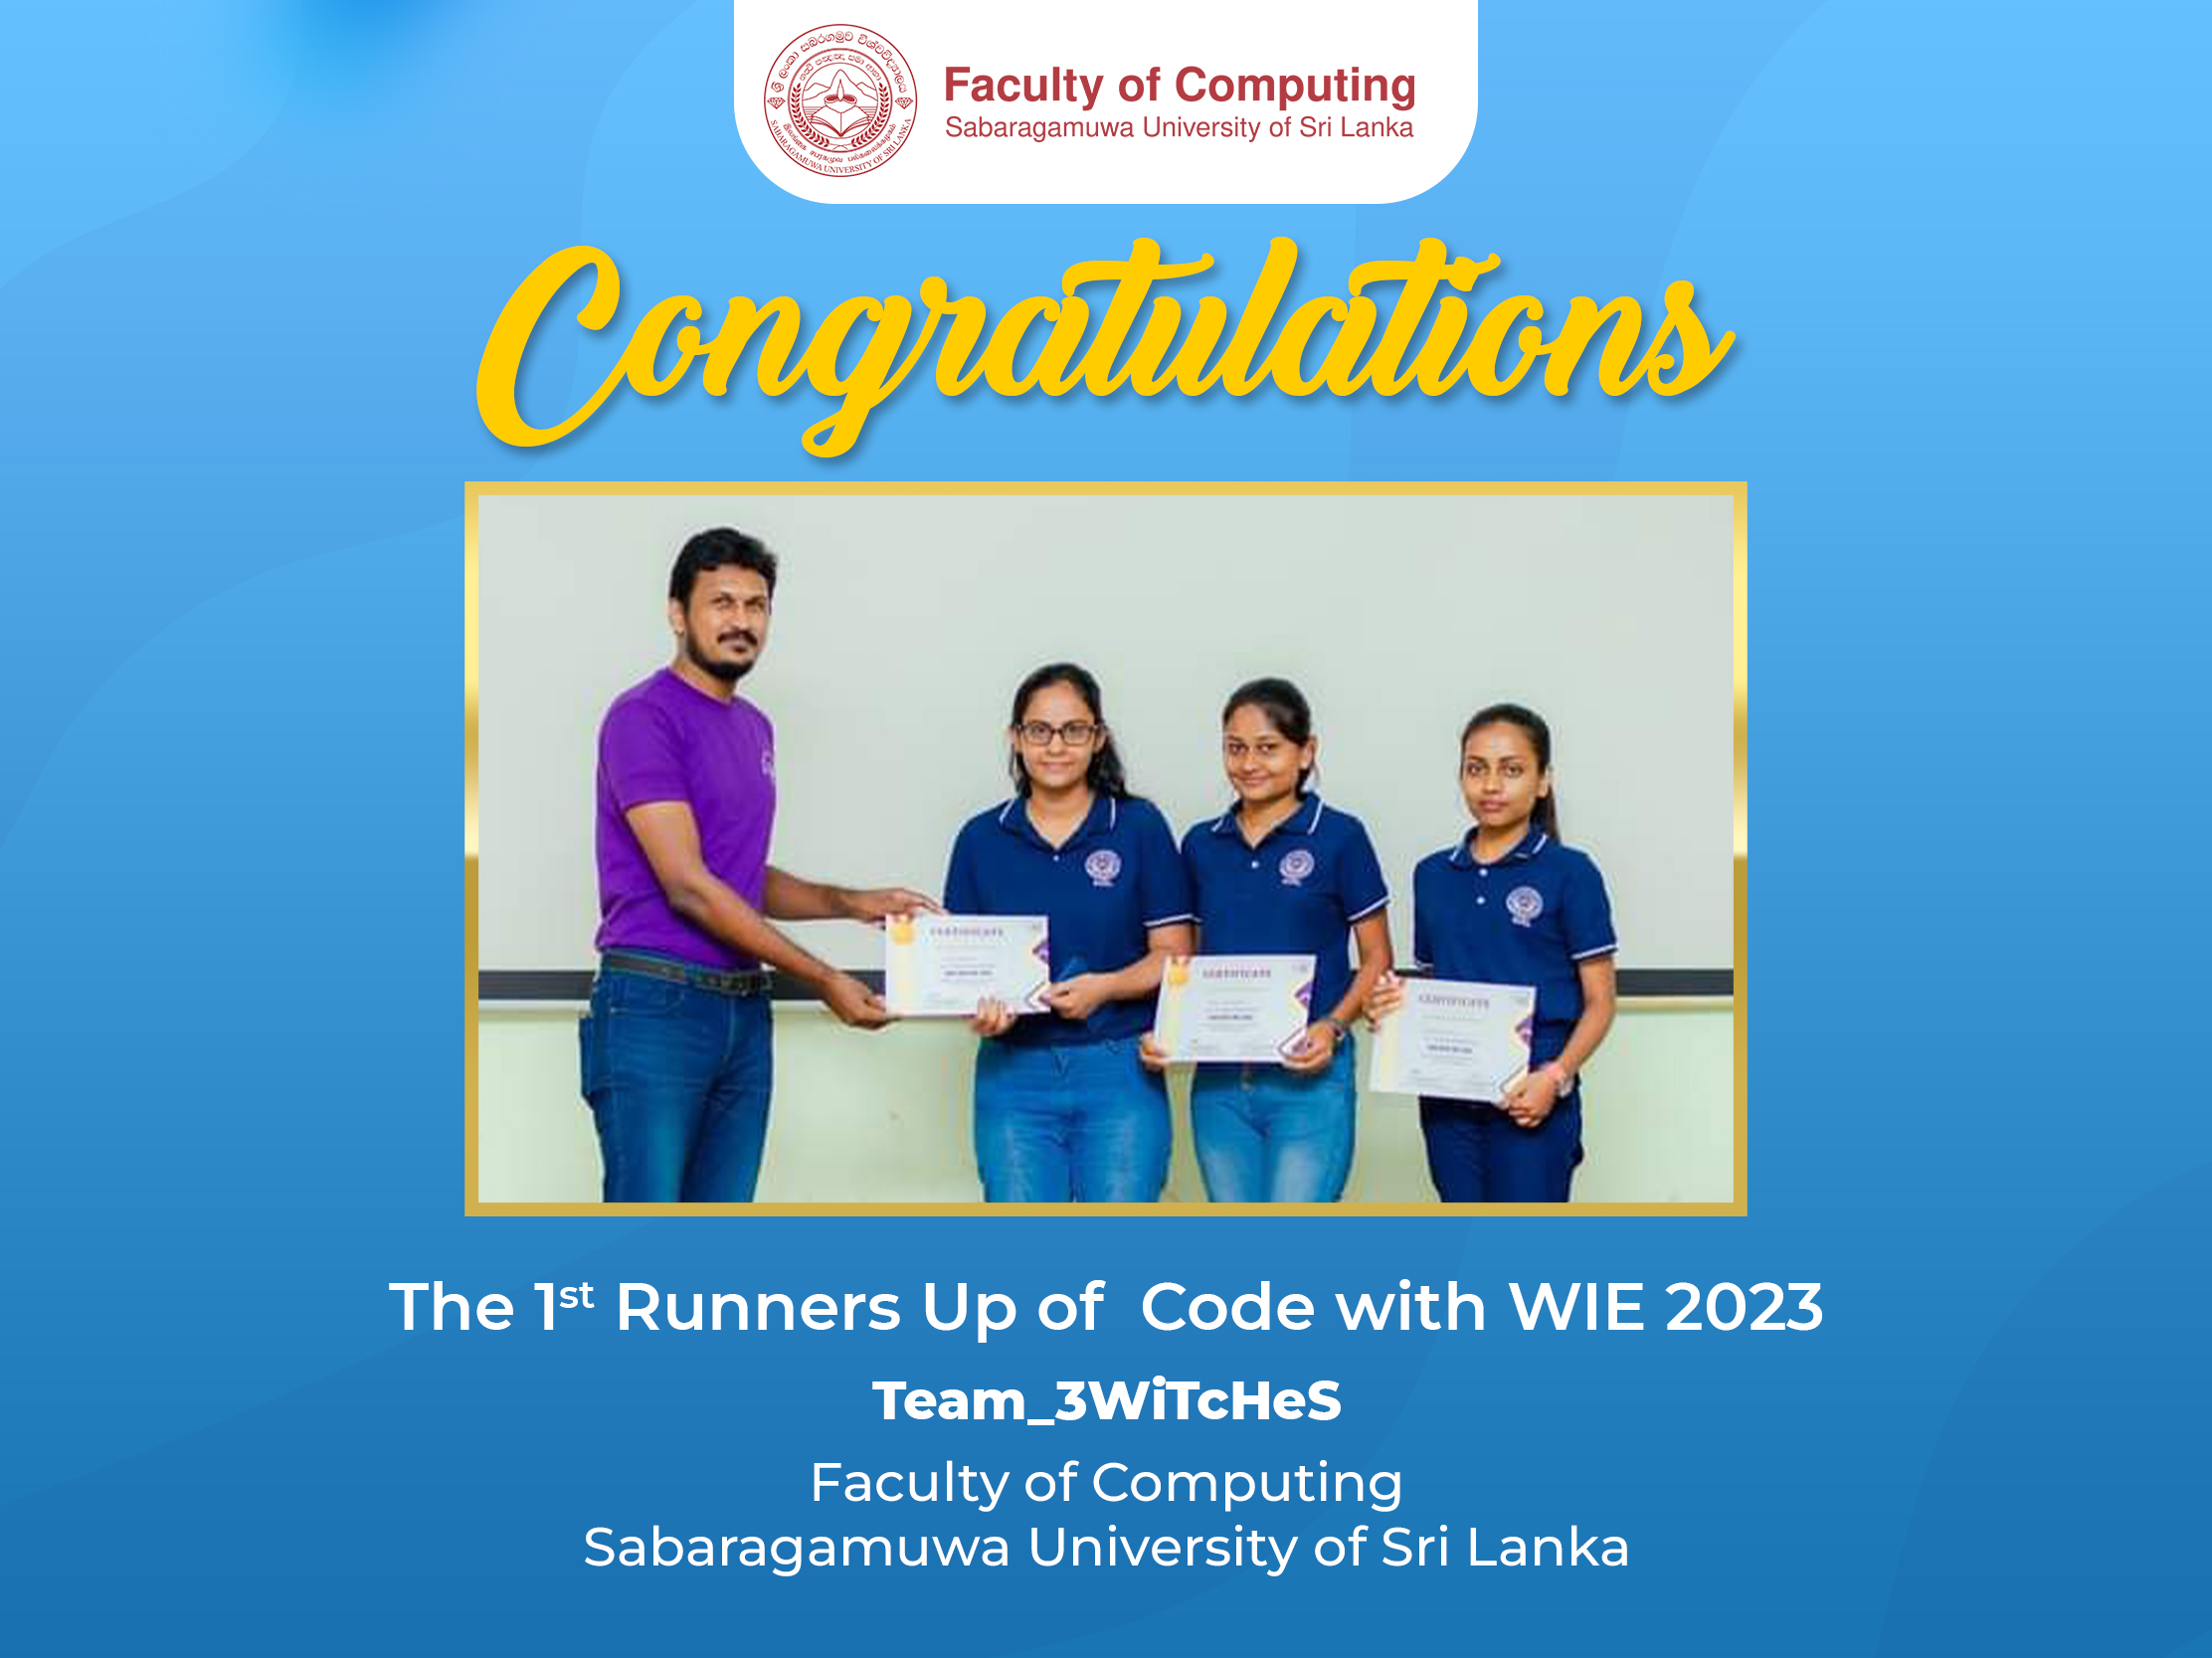 Team 3WiTcHeS - First Runners Up of Code with WIE 2023